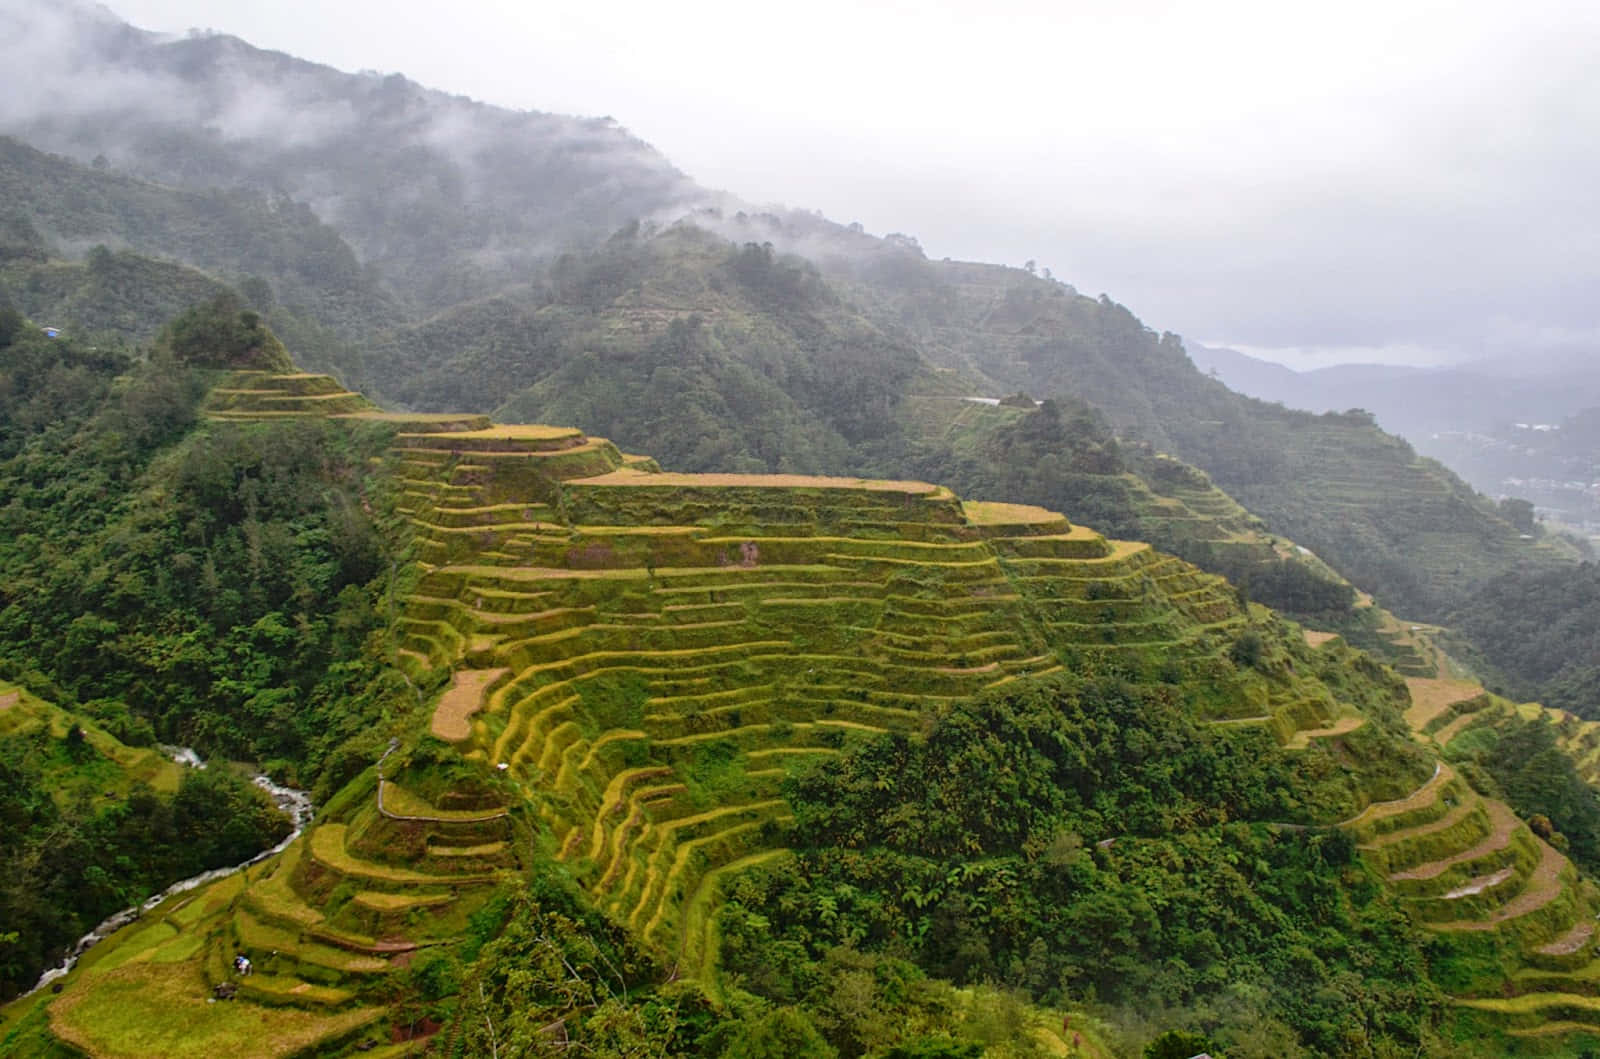 Hazy Banaue Rice Terraces In The Philippines Wallpaper